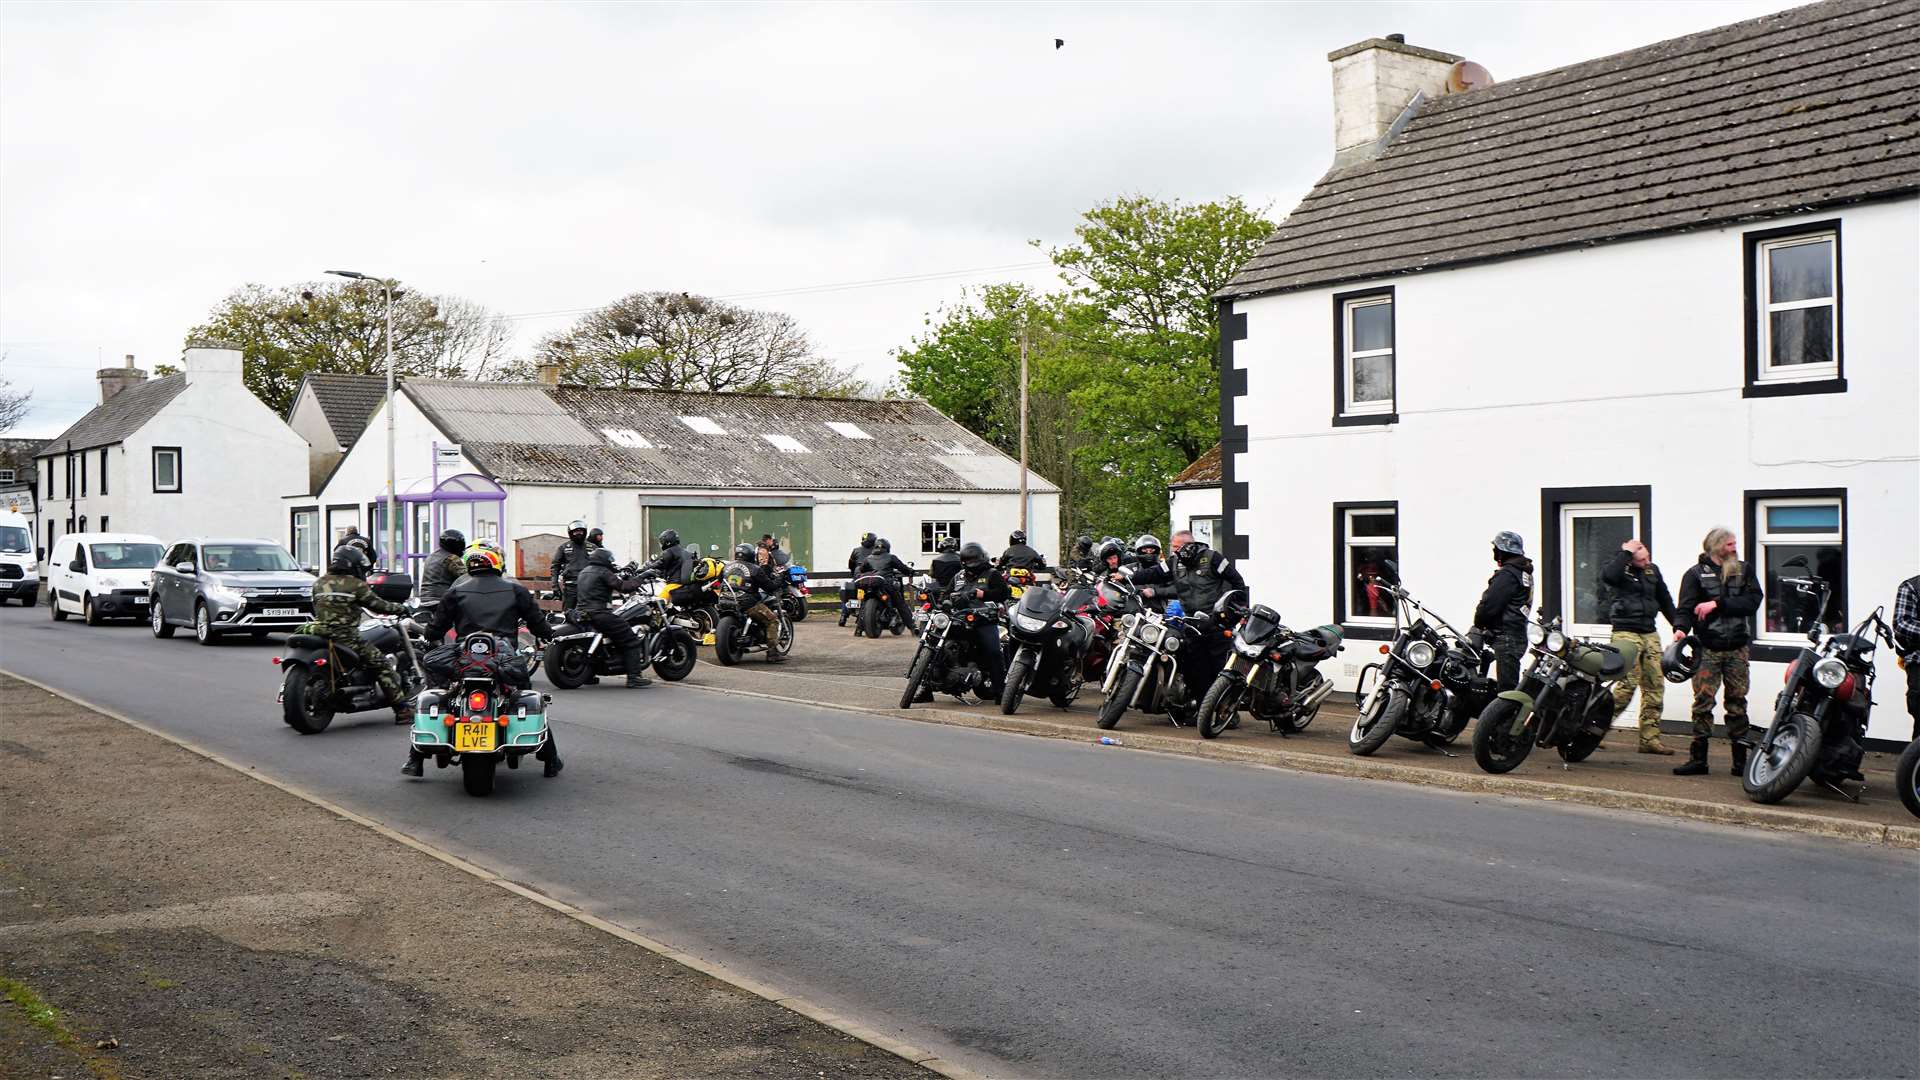 The Blue Angels Motorcycle Club members on their annual run through Scotland. Picture: DGS